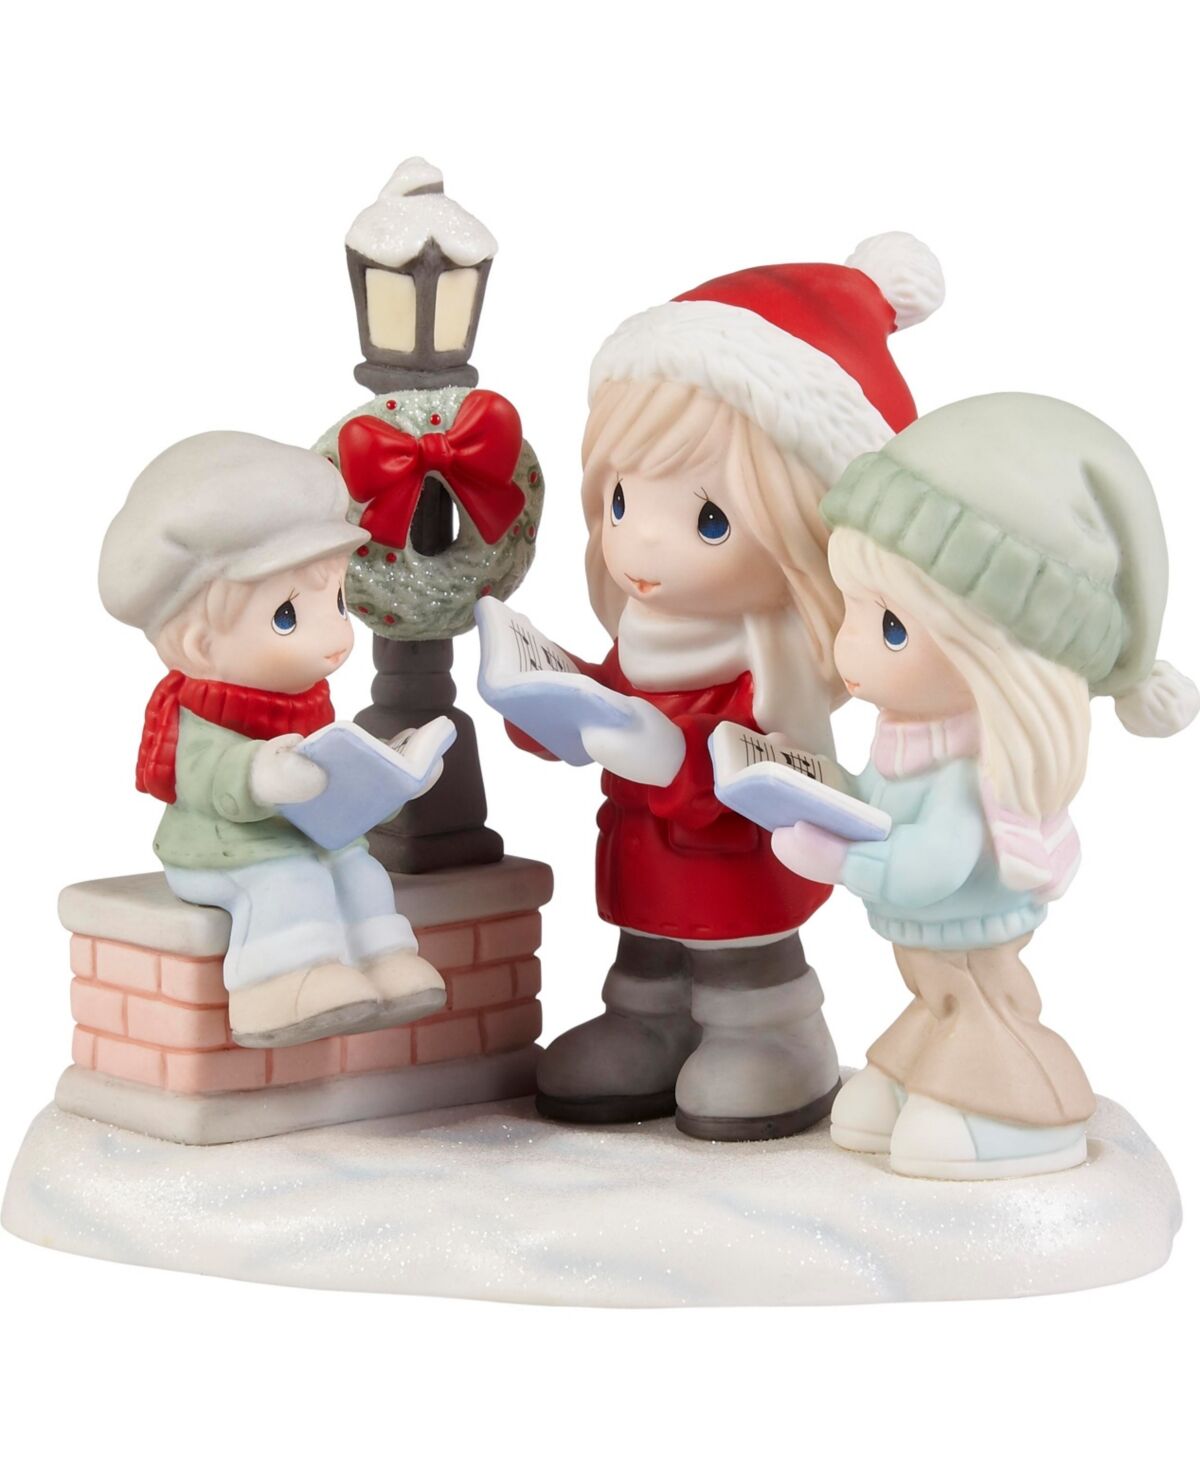 Precious Moments 221029 Here We Come a Caroling Limited Edition Bisque Porcelain Figurine - Multicolor